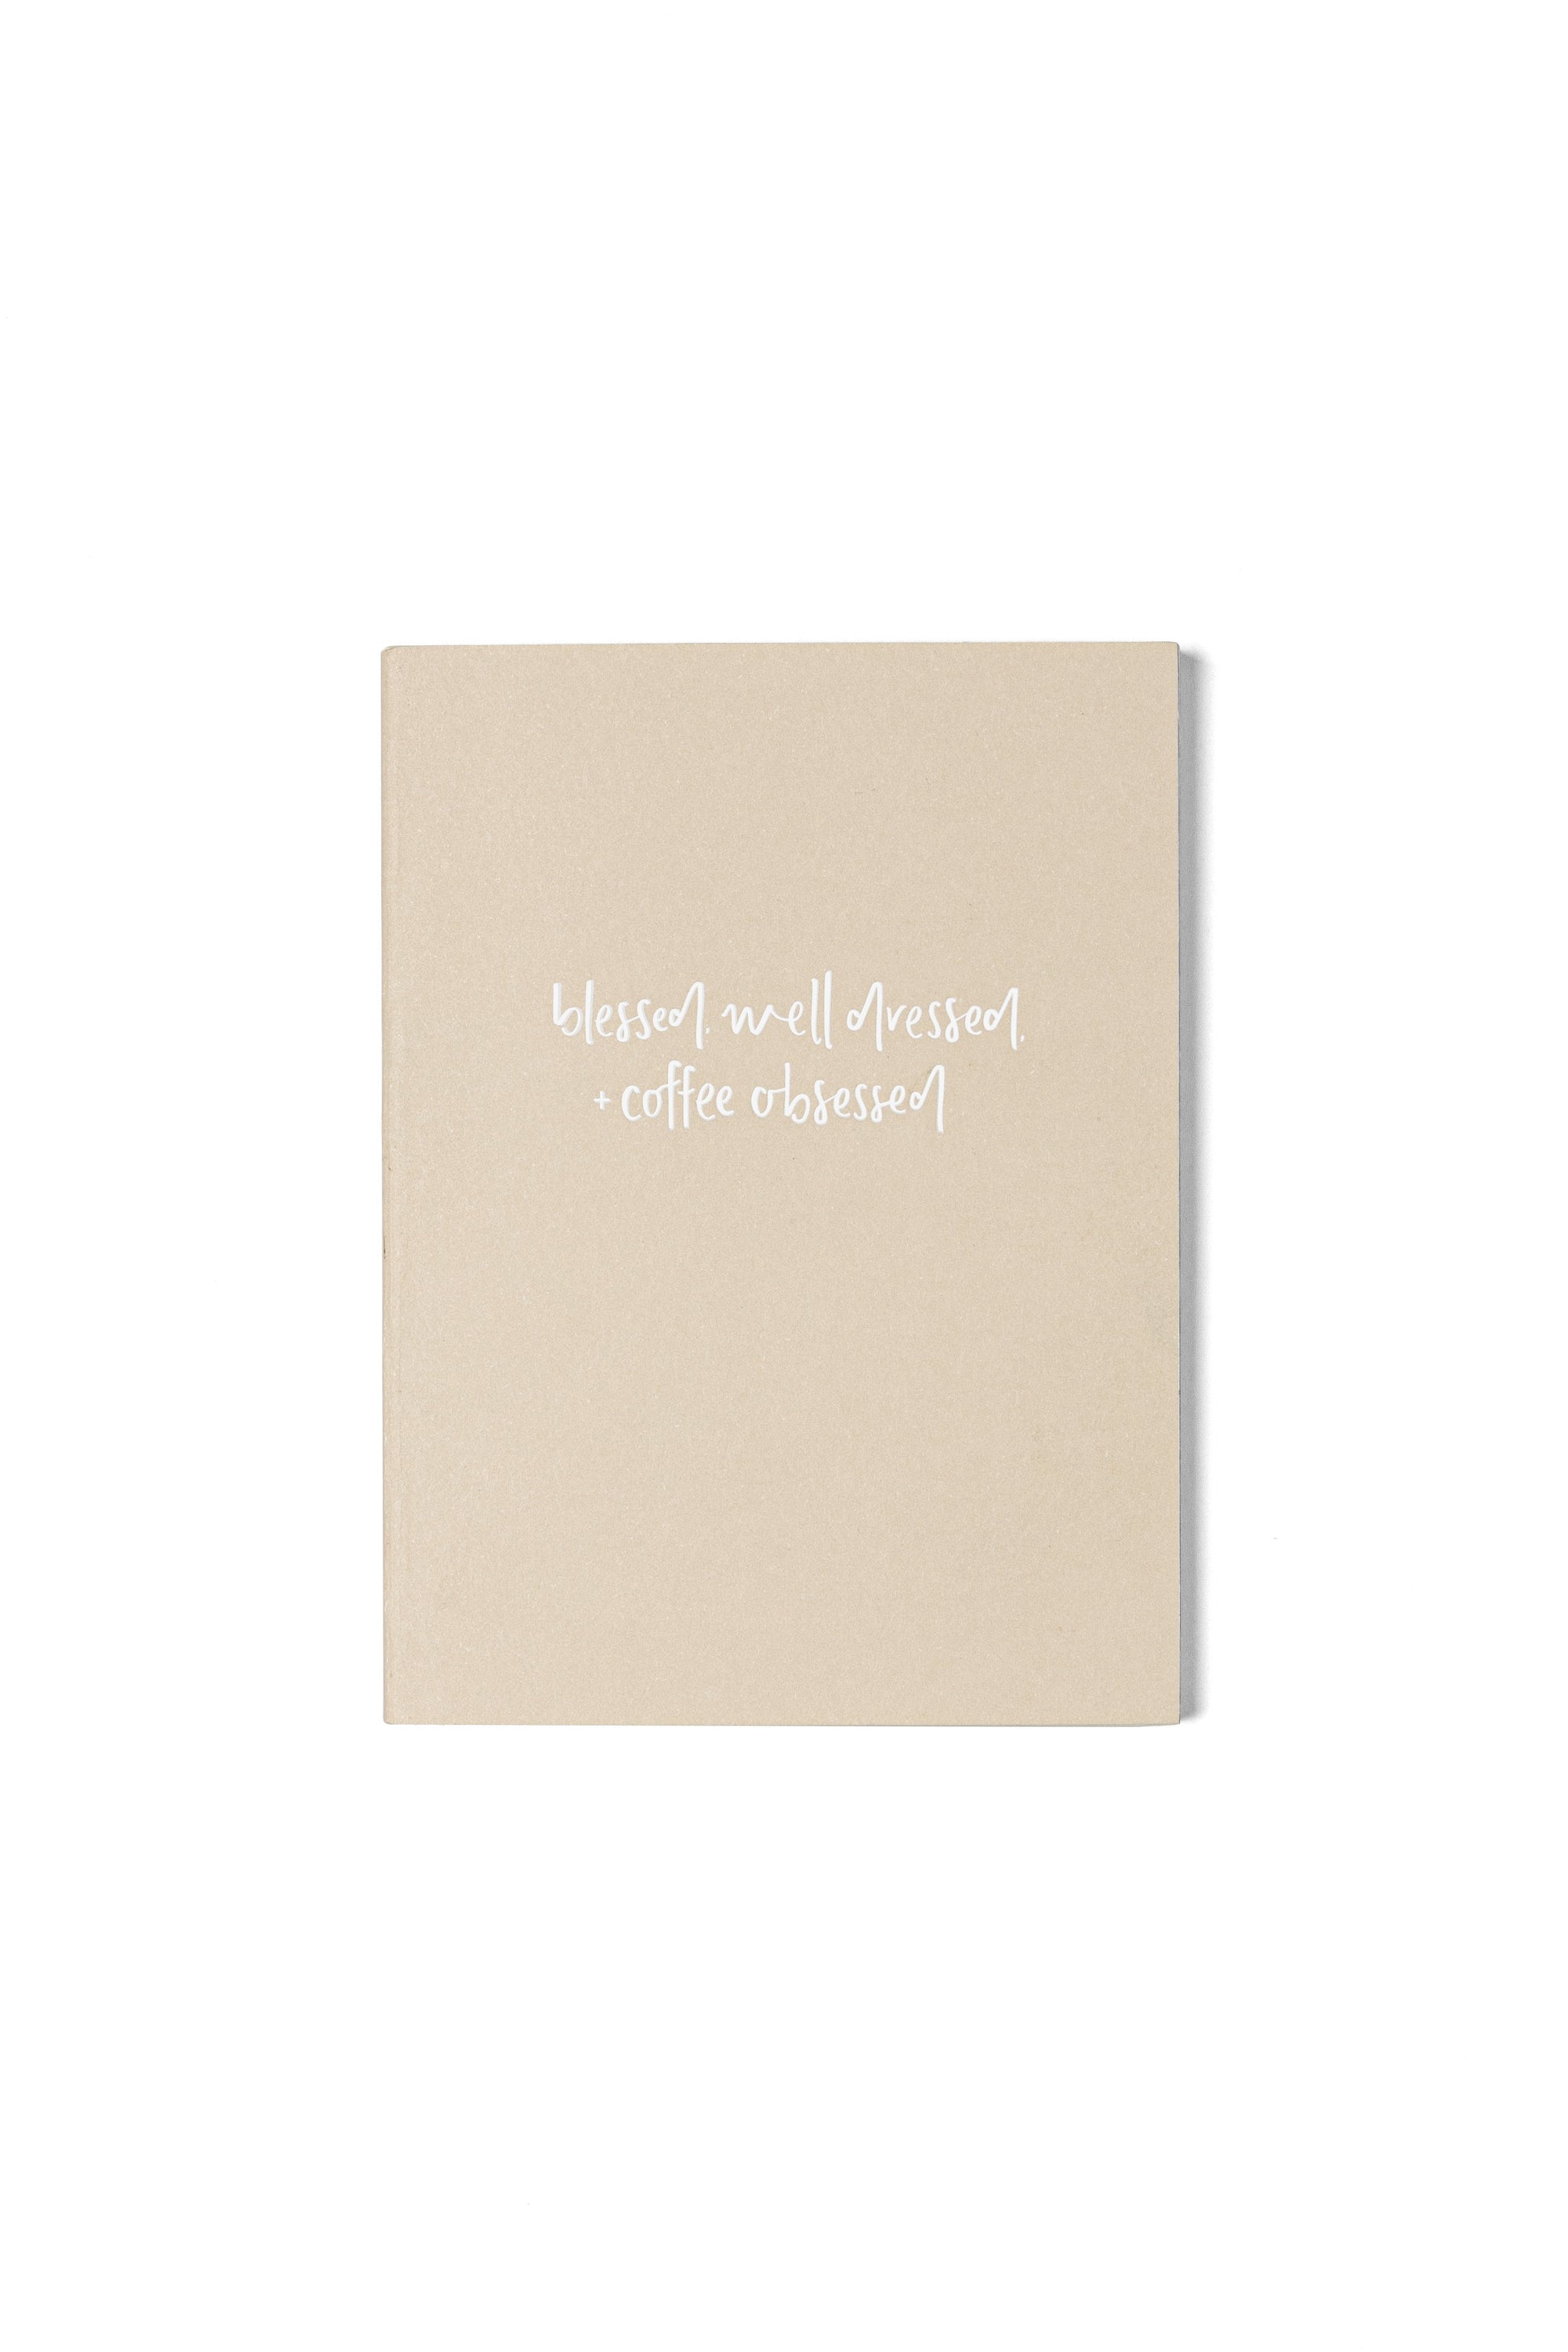 Blessed, Well Dressed + Coffee Obsessed Journal - Luna & Soul